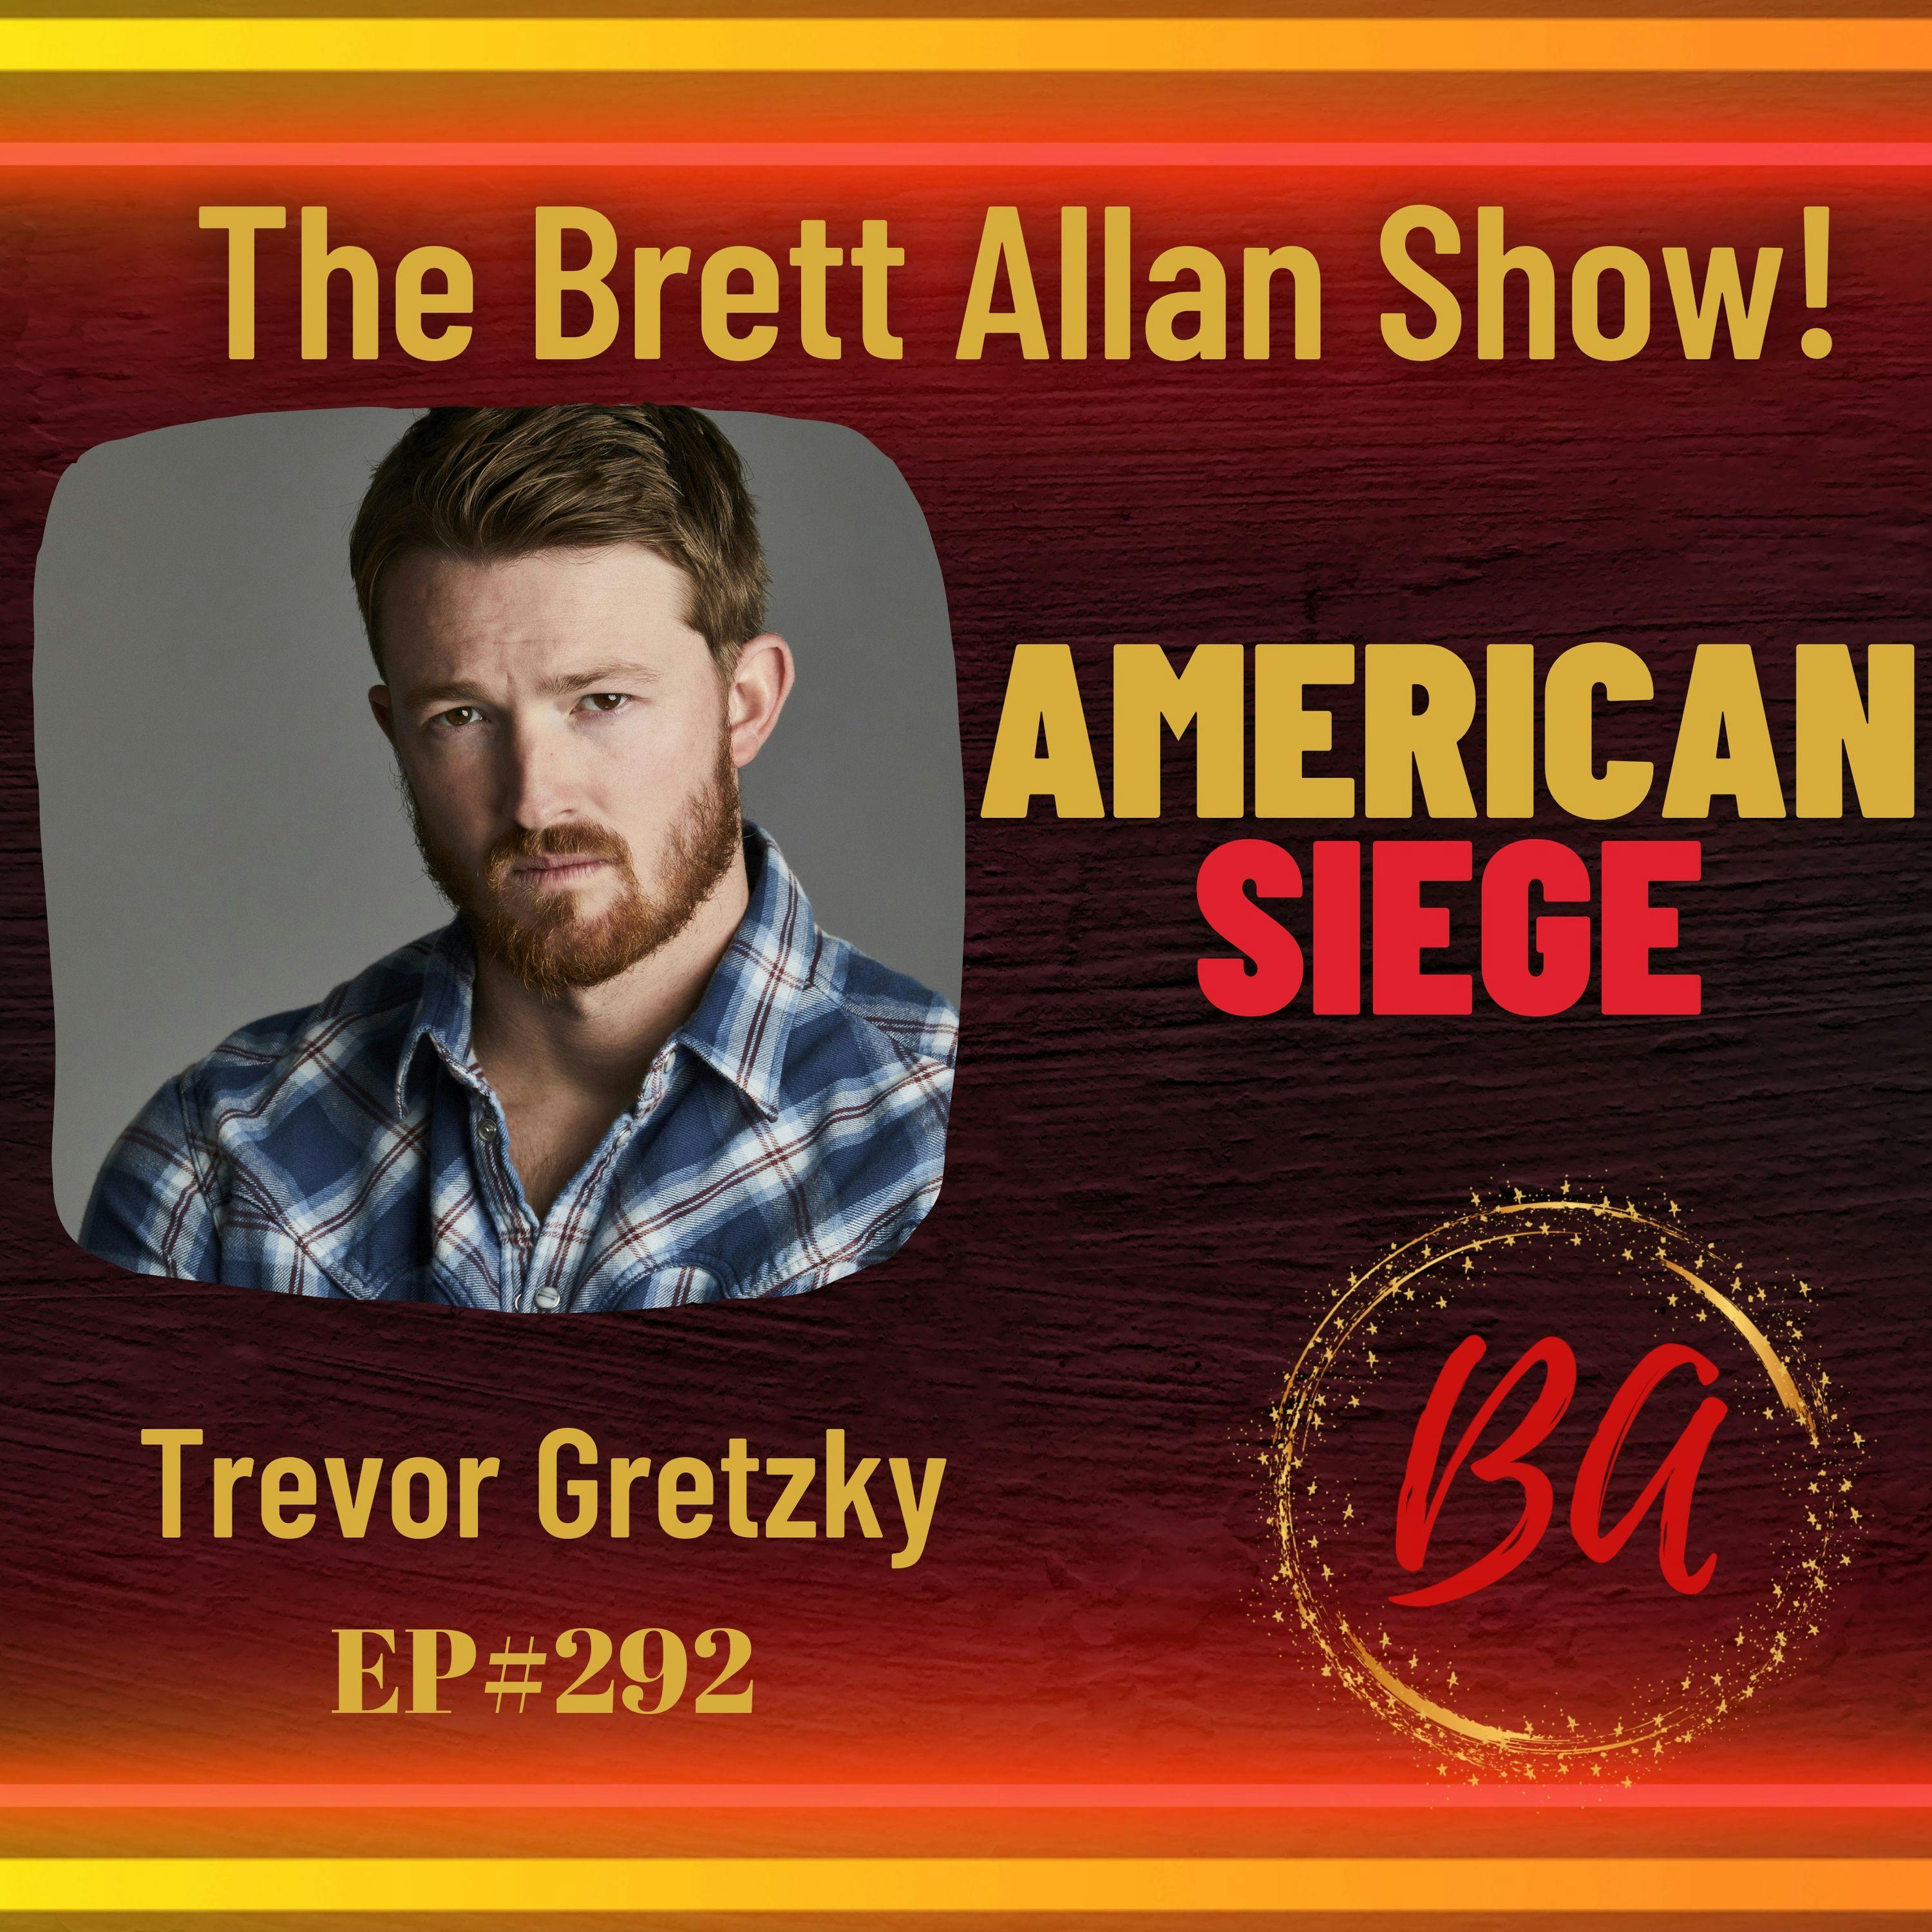 Actor Trevor Gretzky Talks About His New Film "American Siege" | Available Everywhere to Stream Image